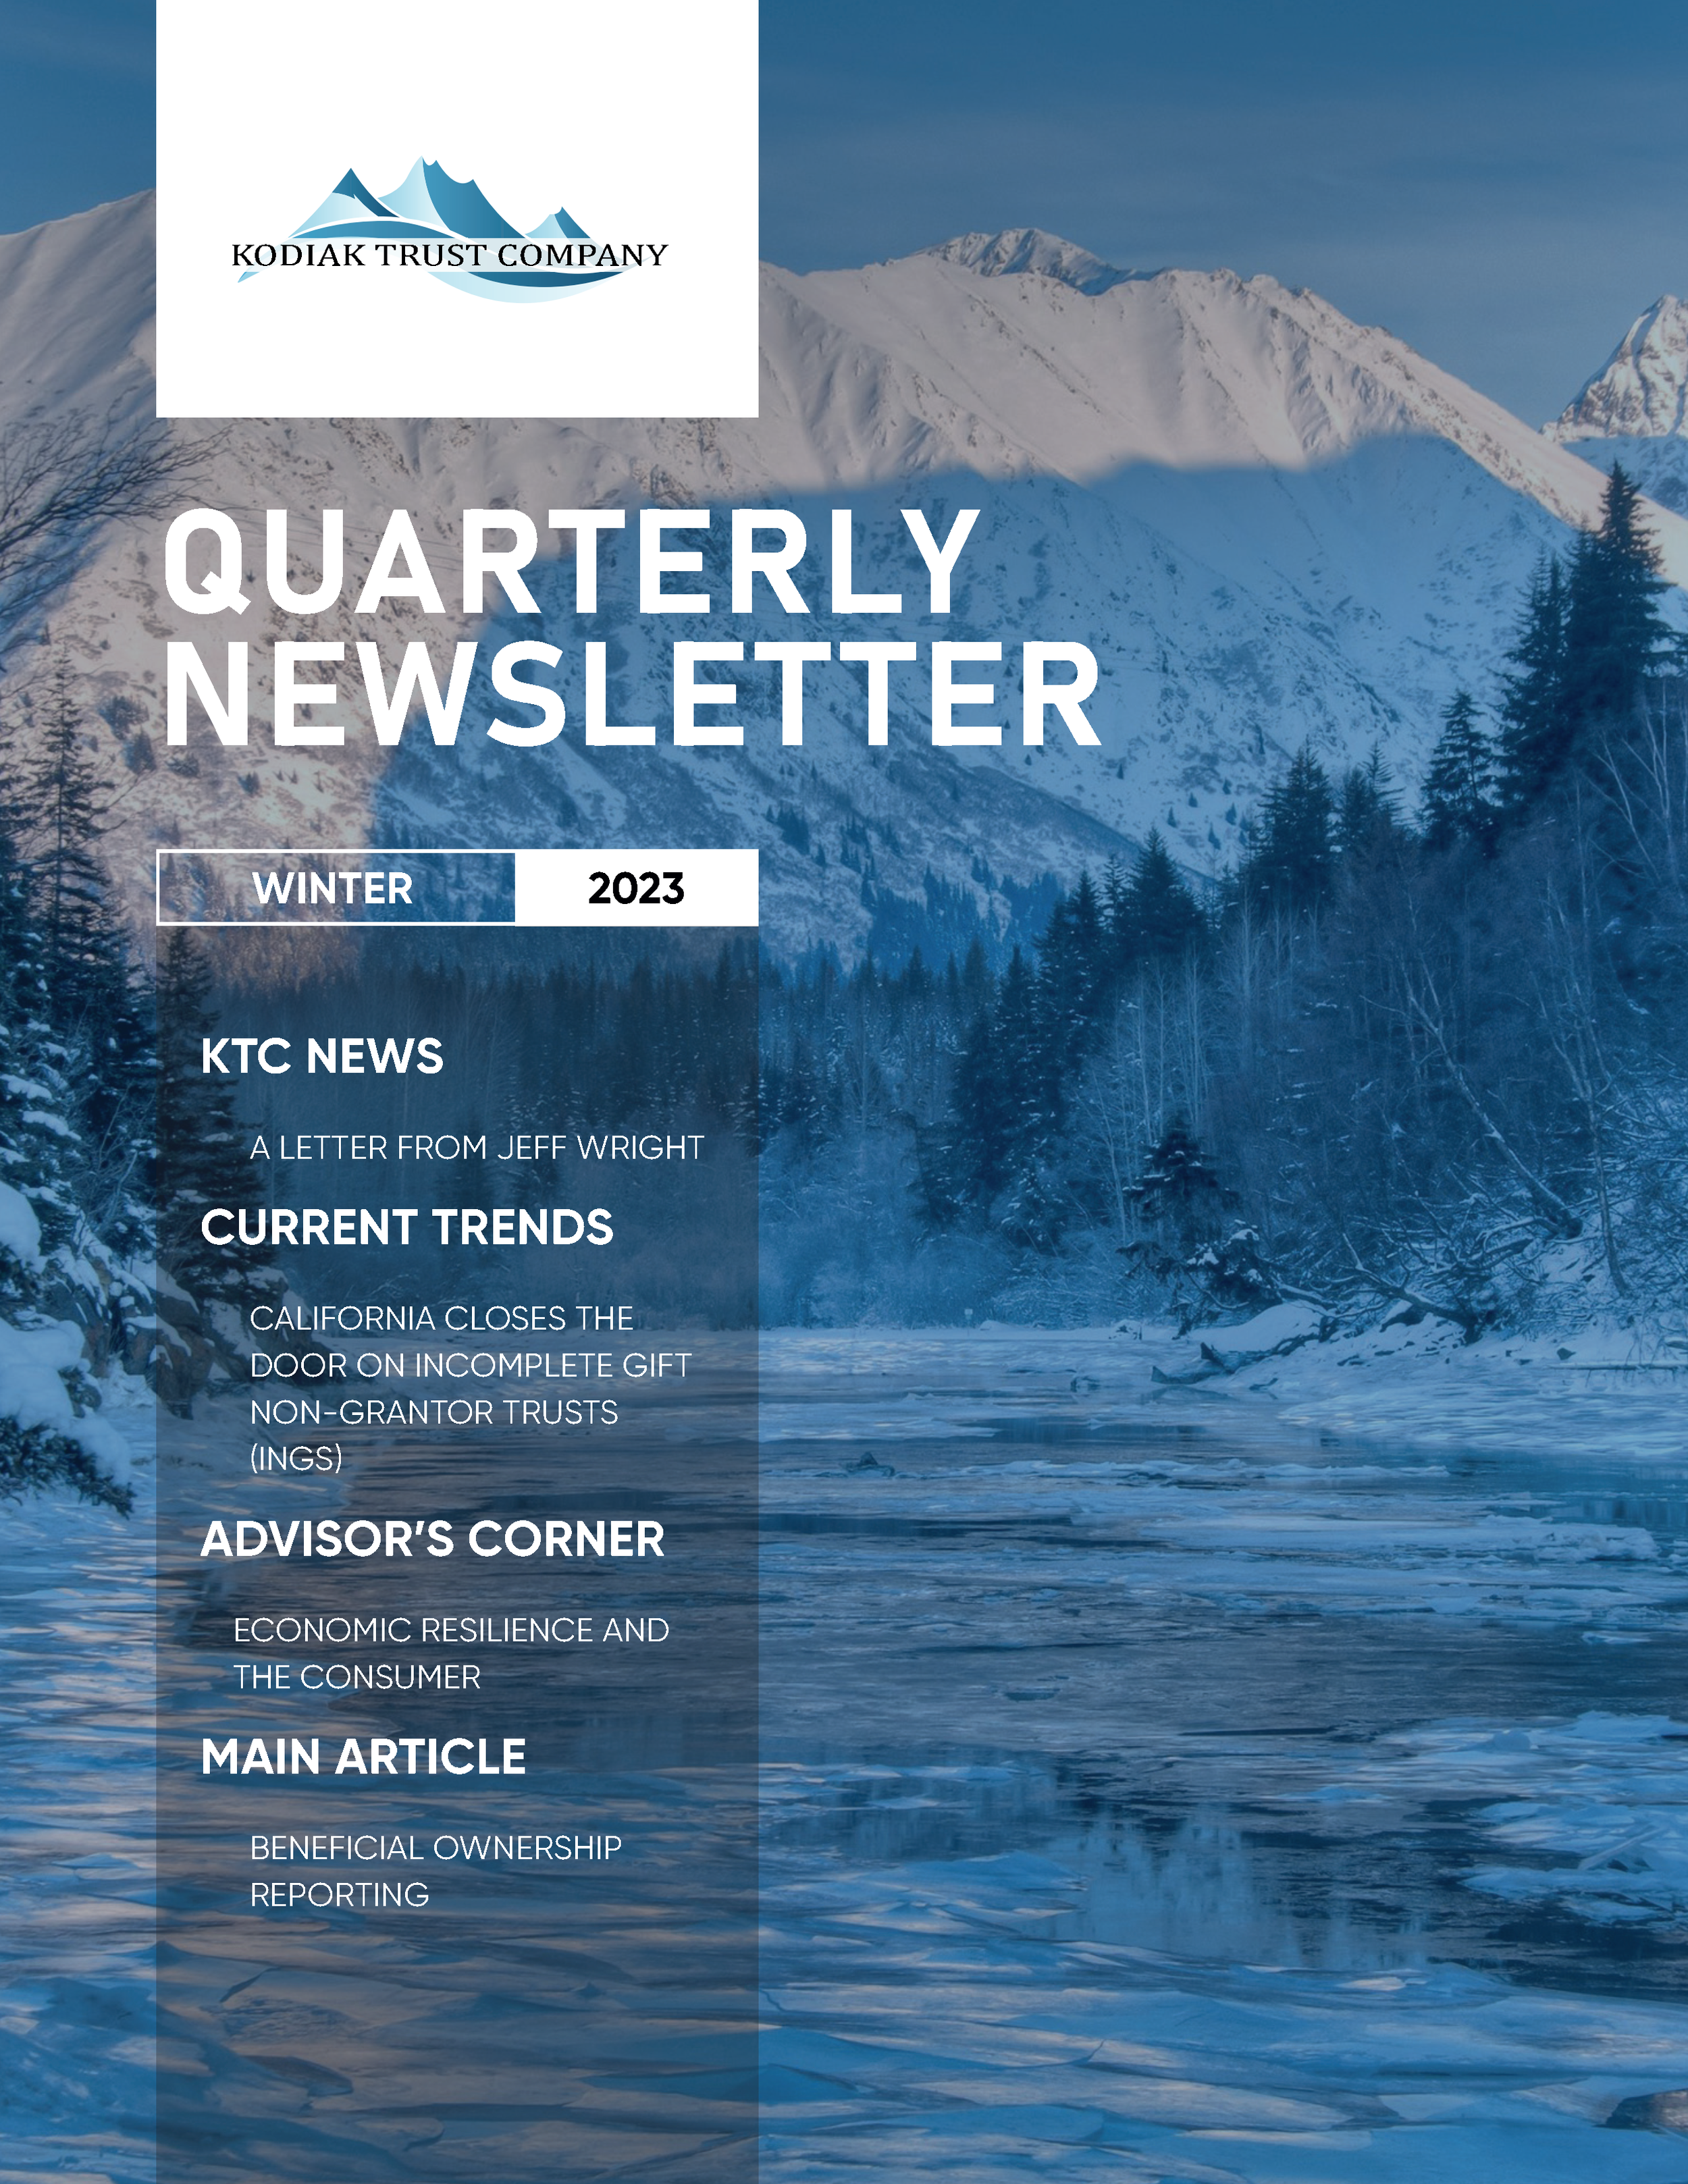 KTC QUARTERLY NEWSLETTER WINTER 2023_Page1.png